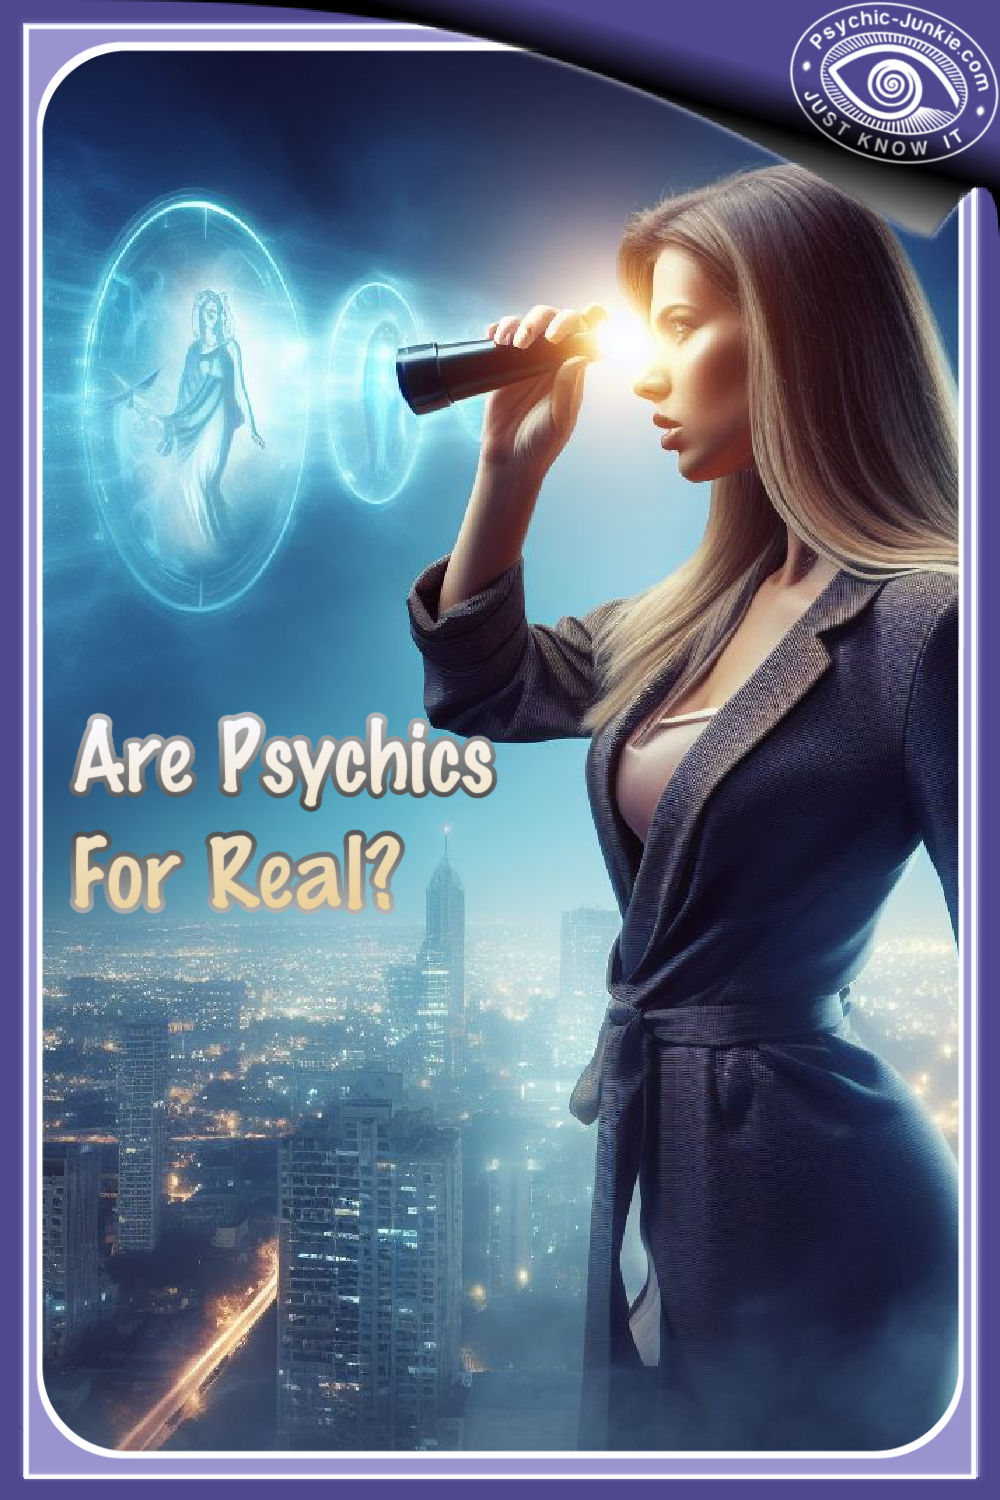 Are Psychics For Real?